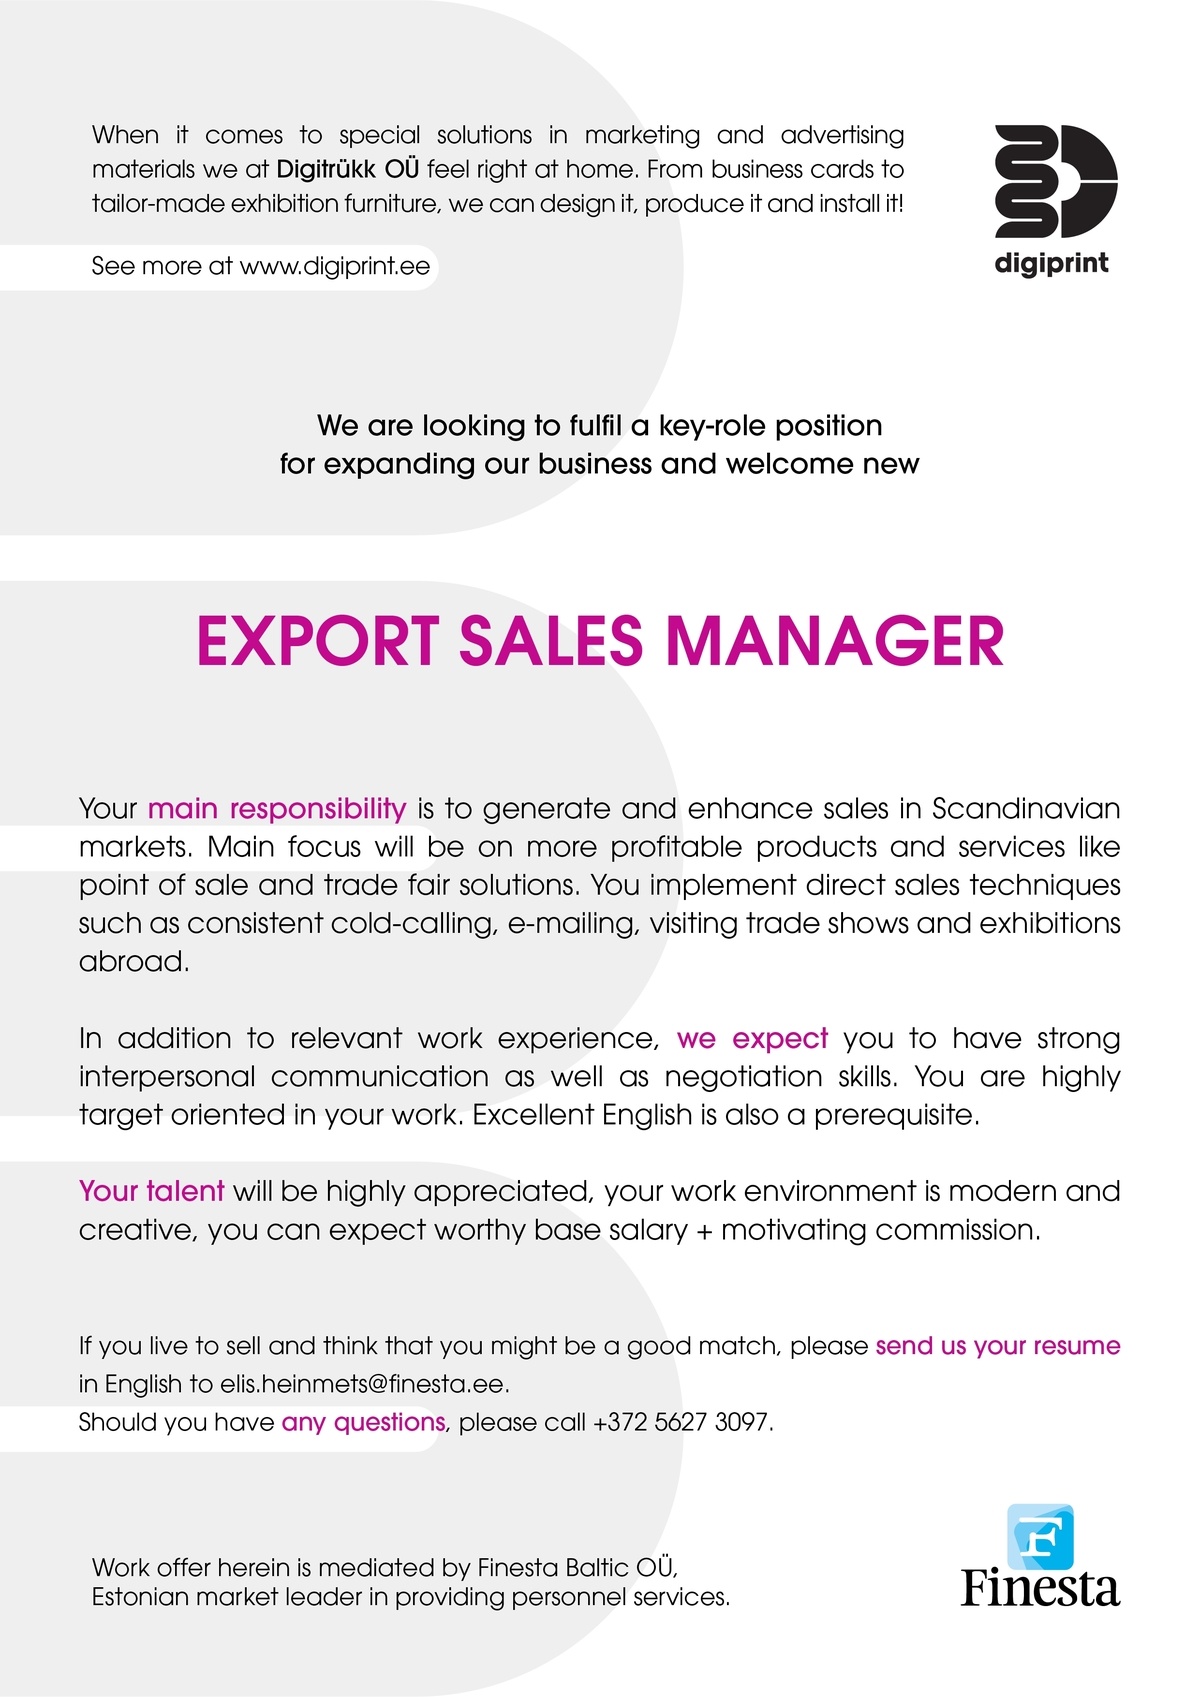 Finesta Baltic OÜ EXPORT SALES MANAGER